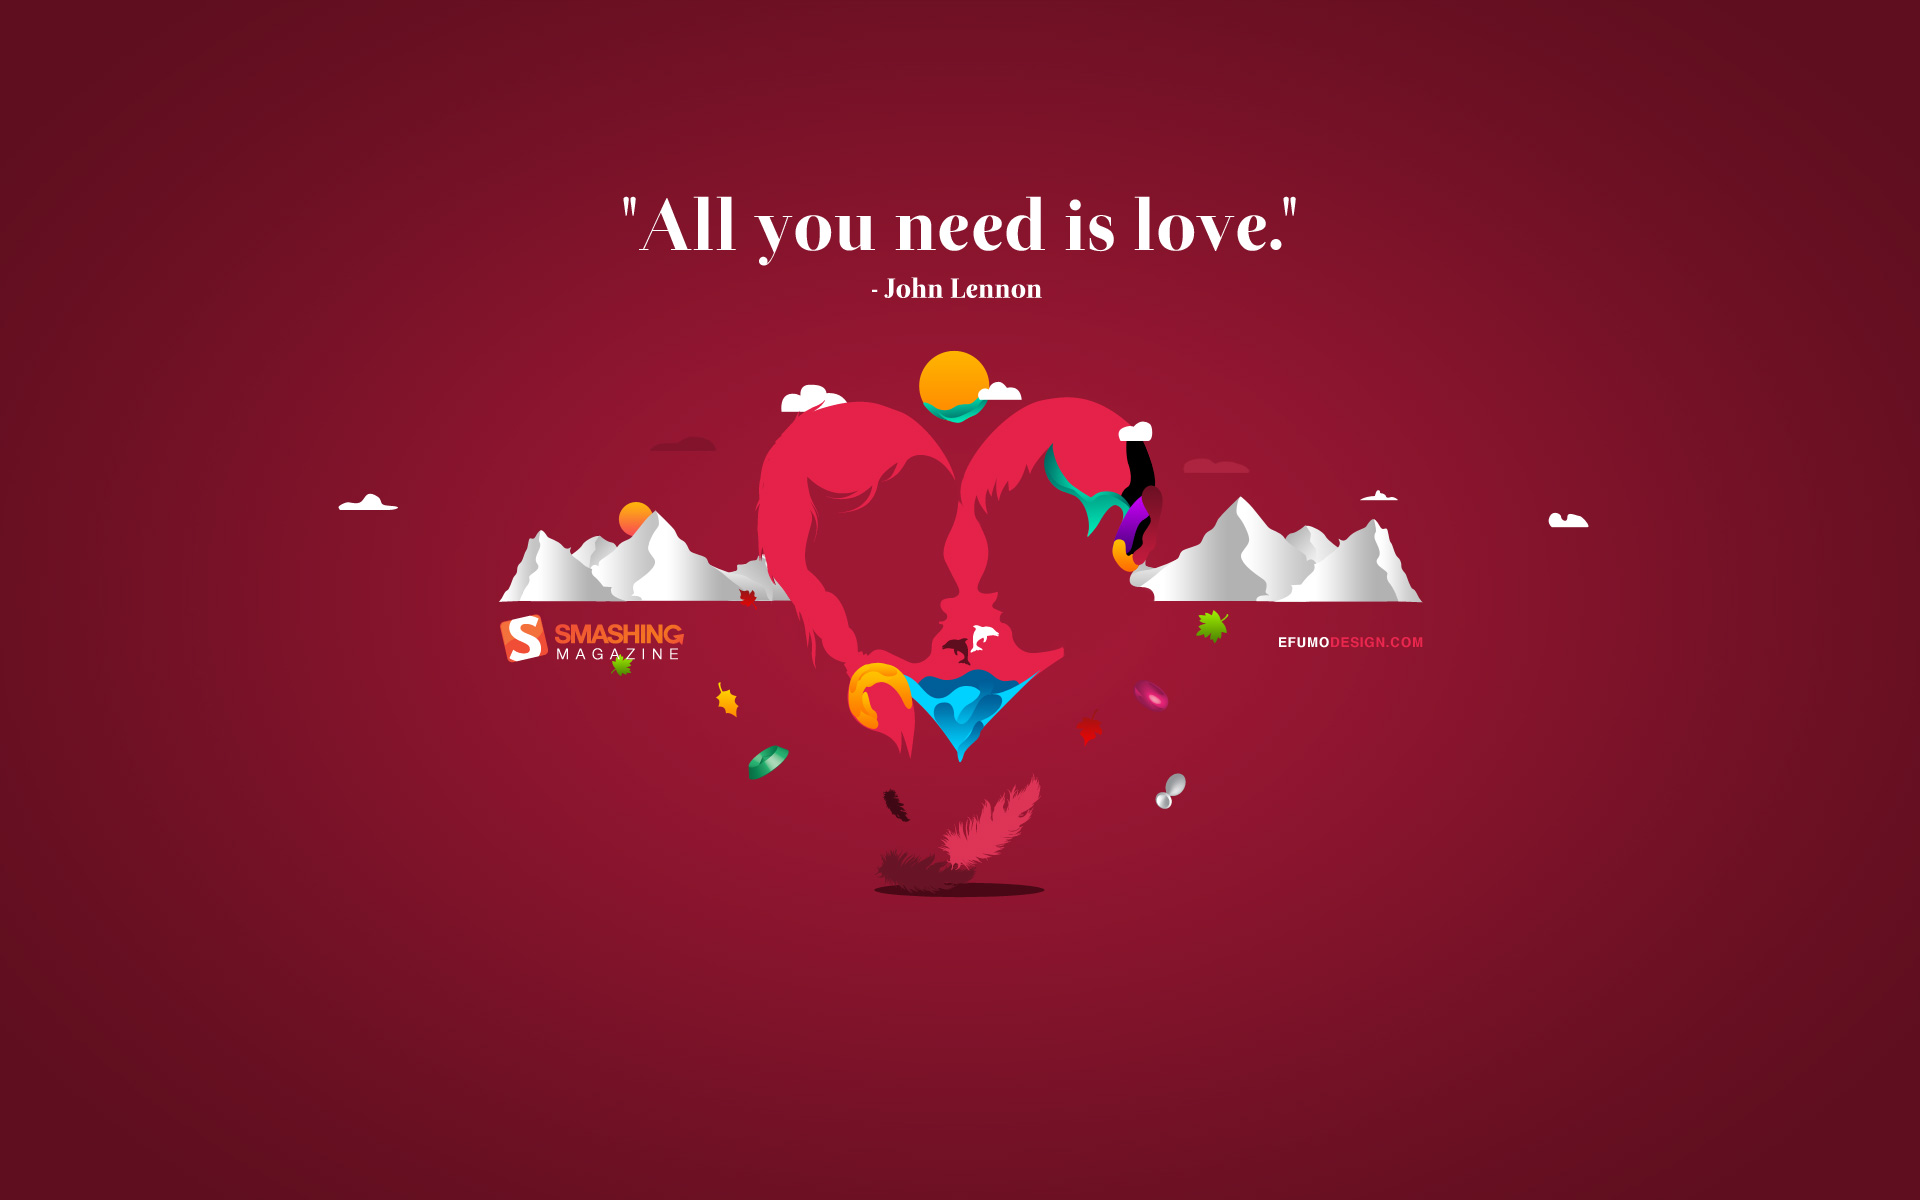 Wallpaper 4k All You Need is Love Wallpaper